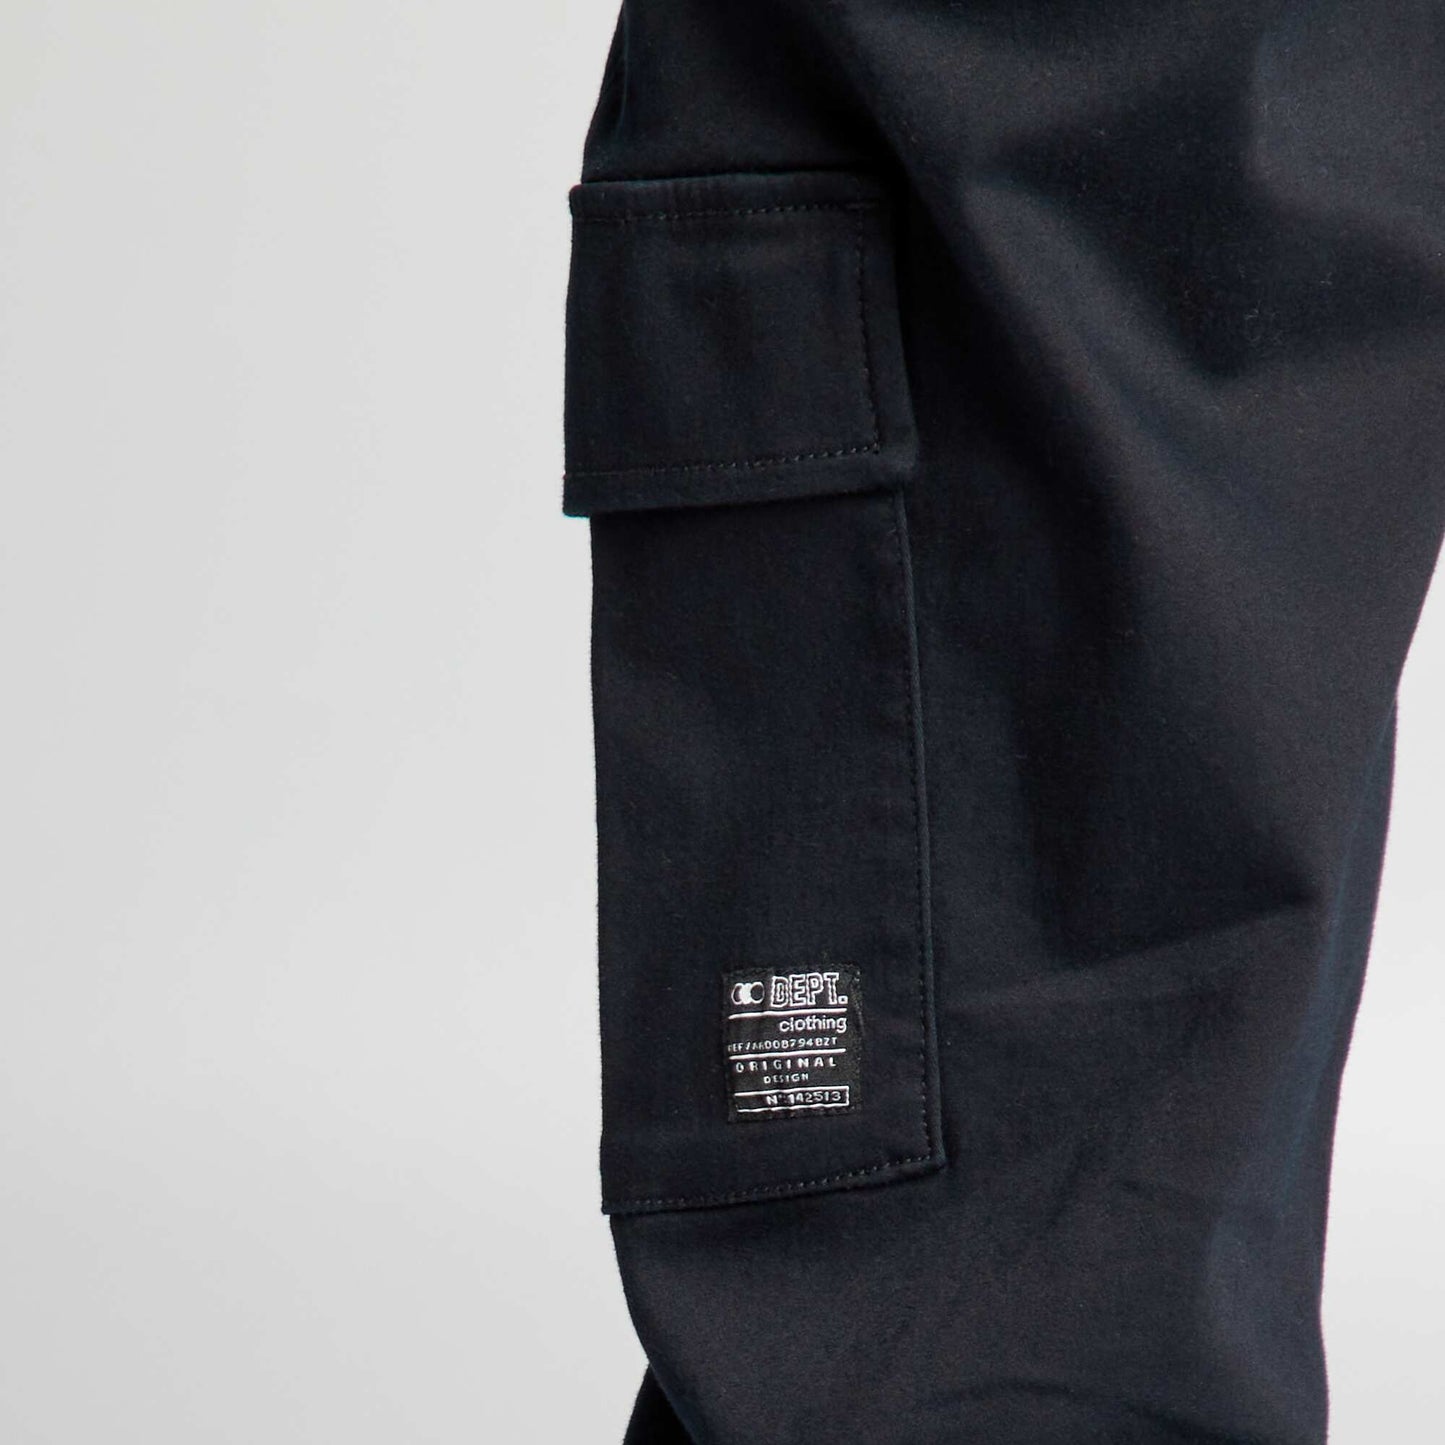 Trousers with side pockets black